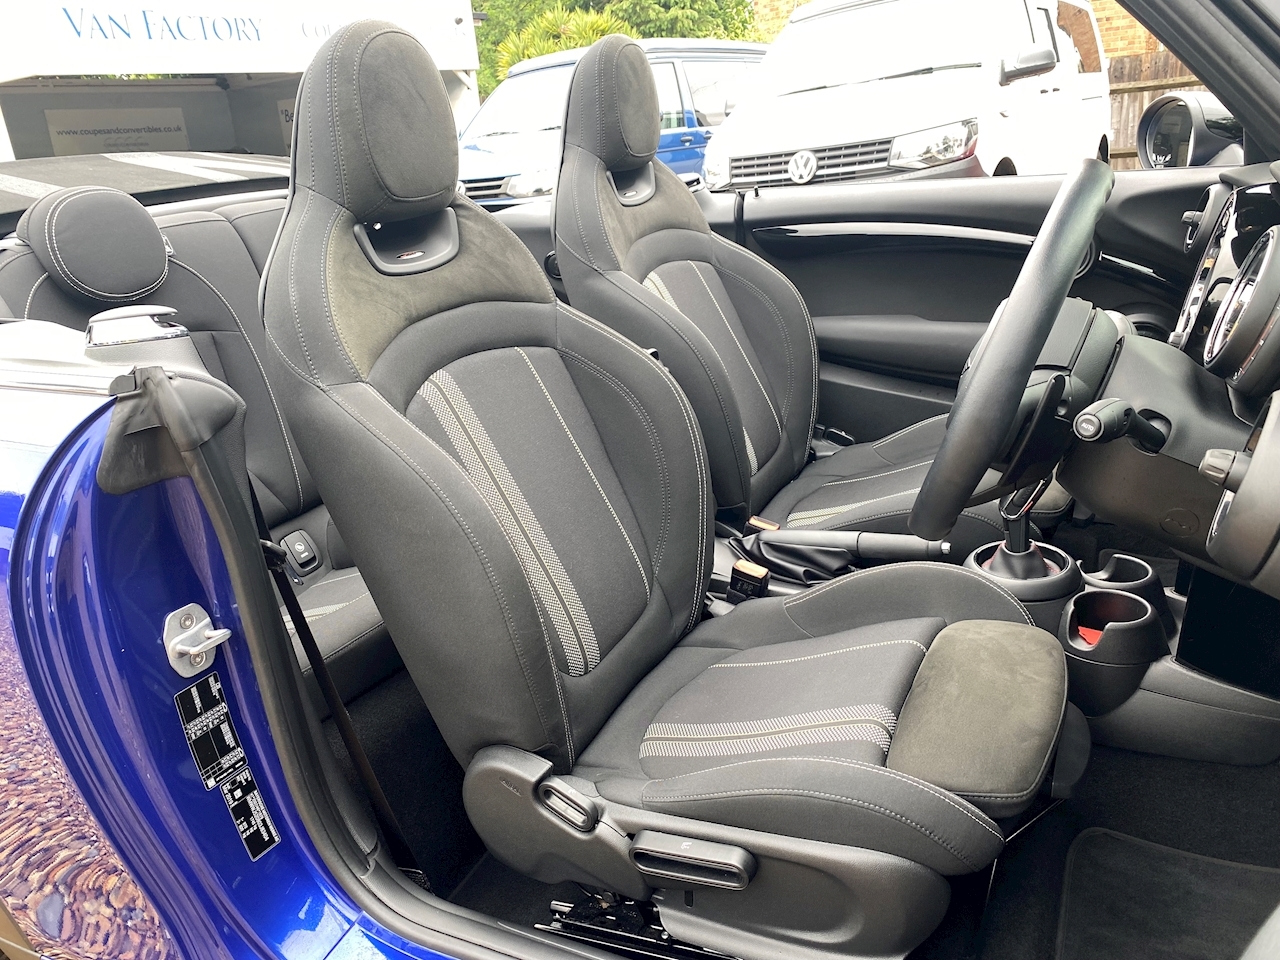 Convertible Cooper S Sport 2.0 2dr Convertible Automatic Petrol